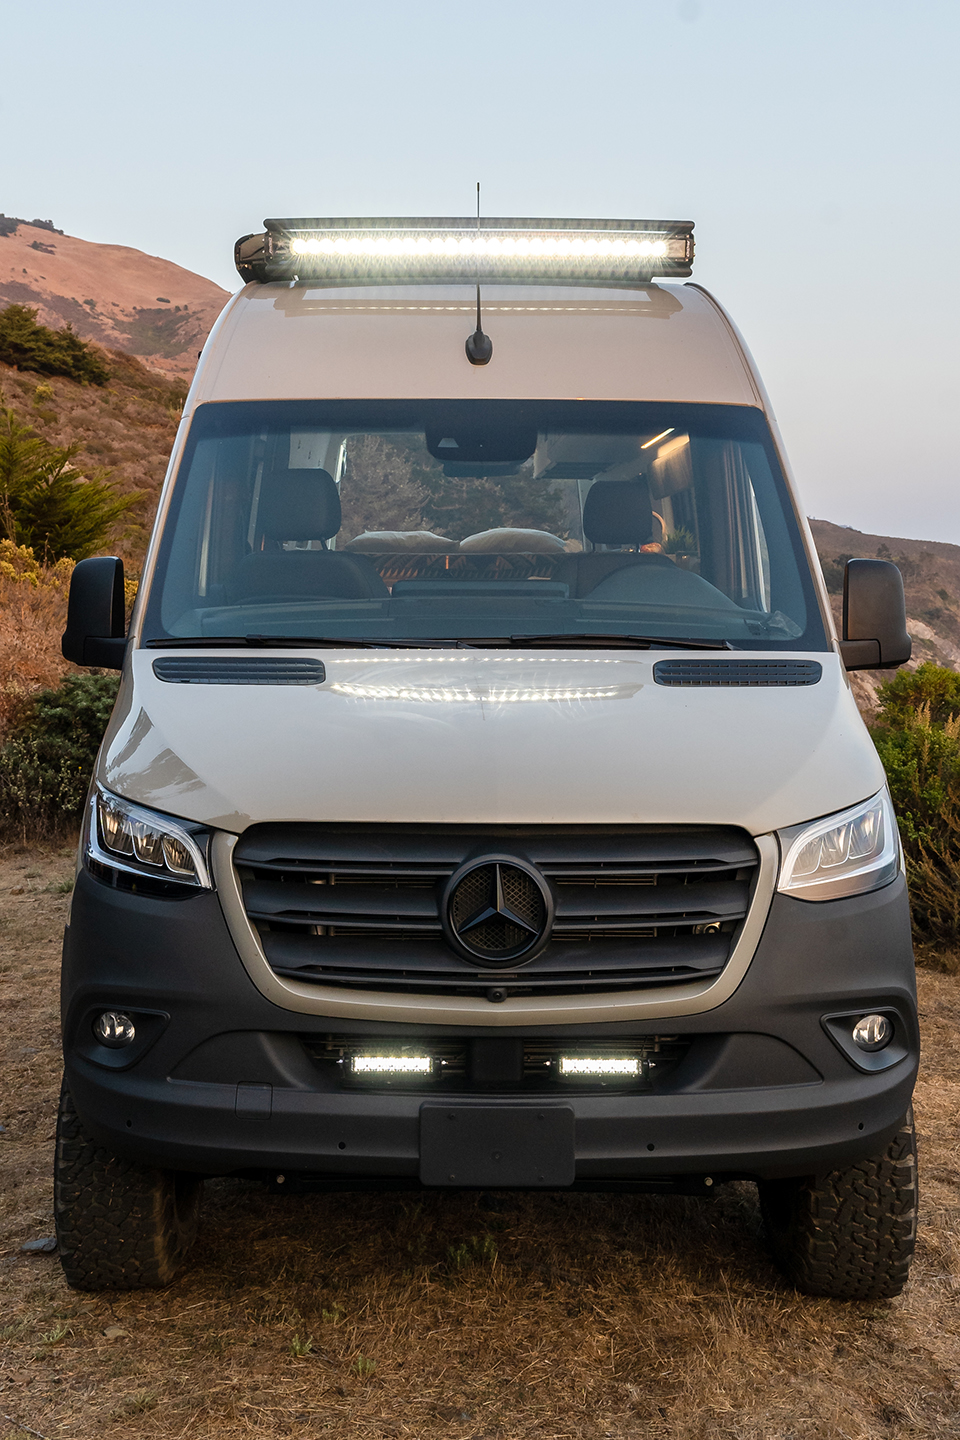 Front of Sprinter van with 50" light bar and dual 6" fog lights